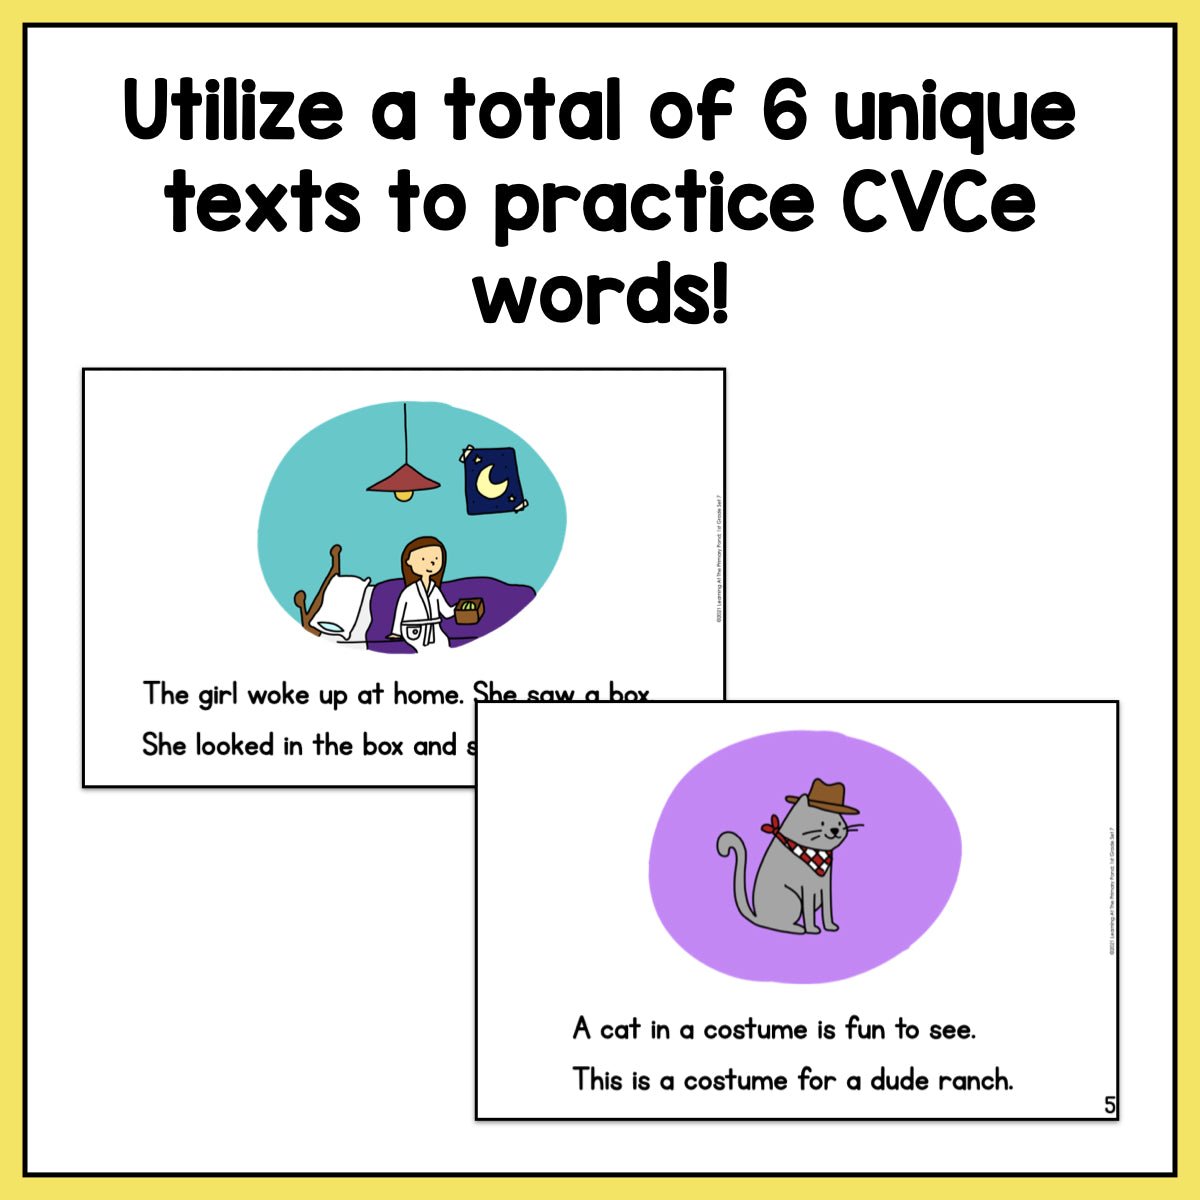 Decodable Readers | CVCe Silent E Reading Passages | First Grade Set 7 - learning-at-the-primary-pond